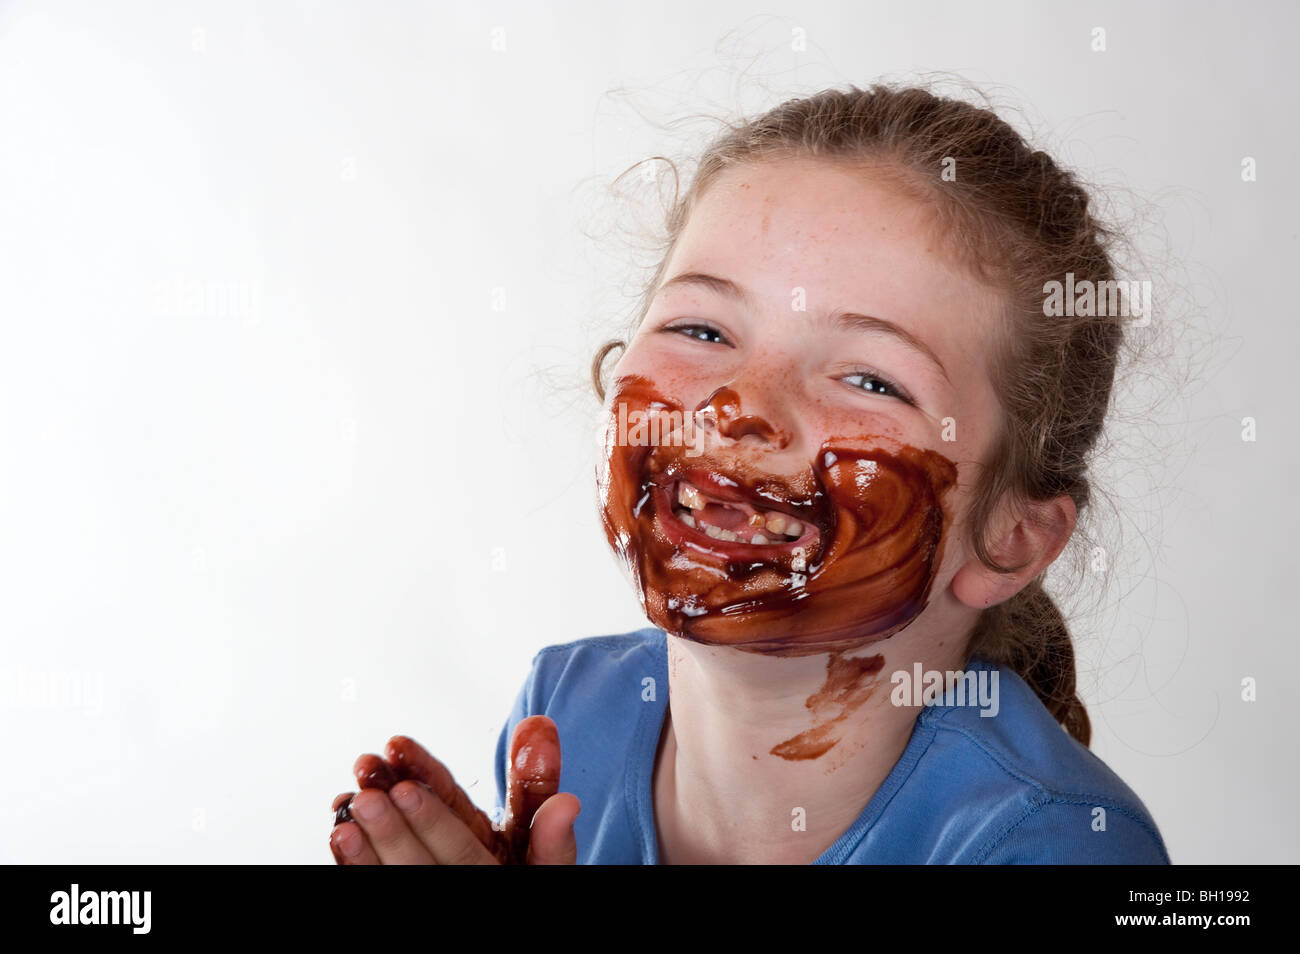 little girl smiling through chocolate covered face Stock Photo